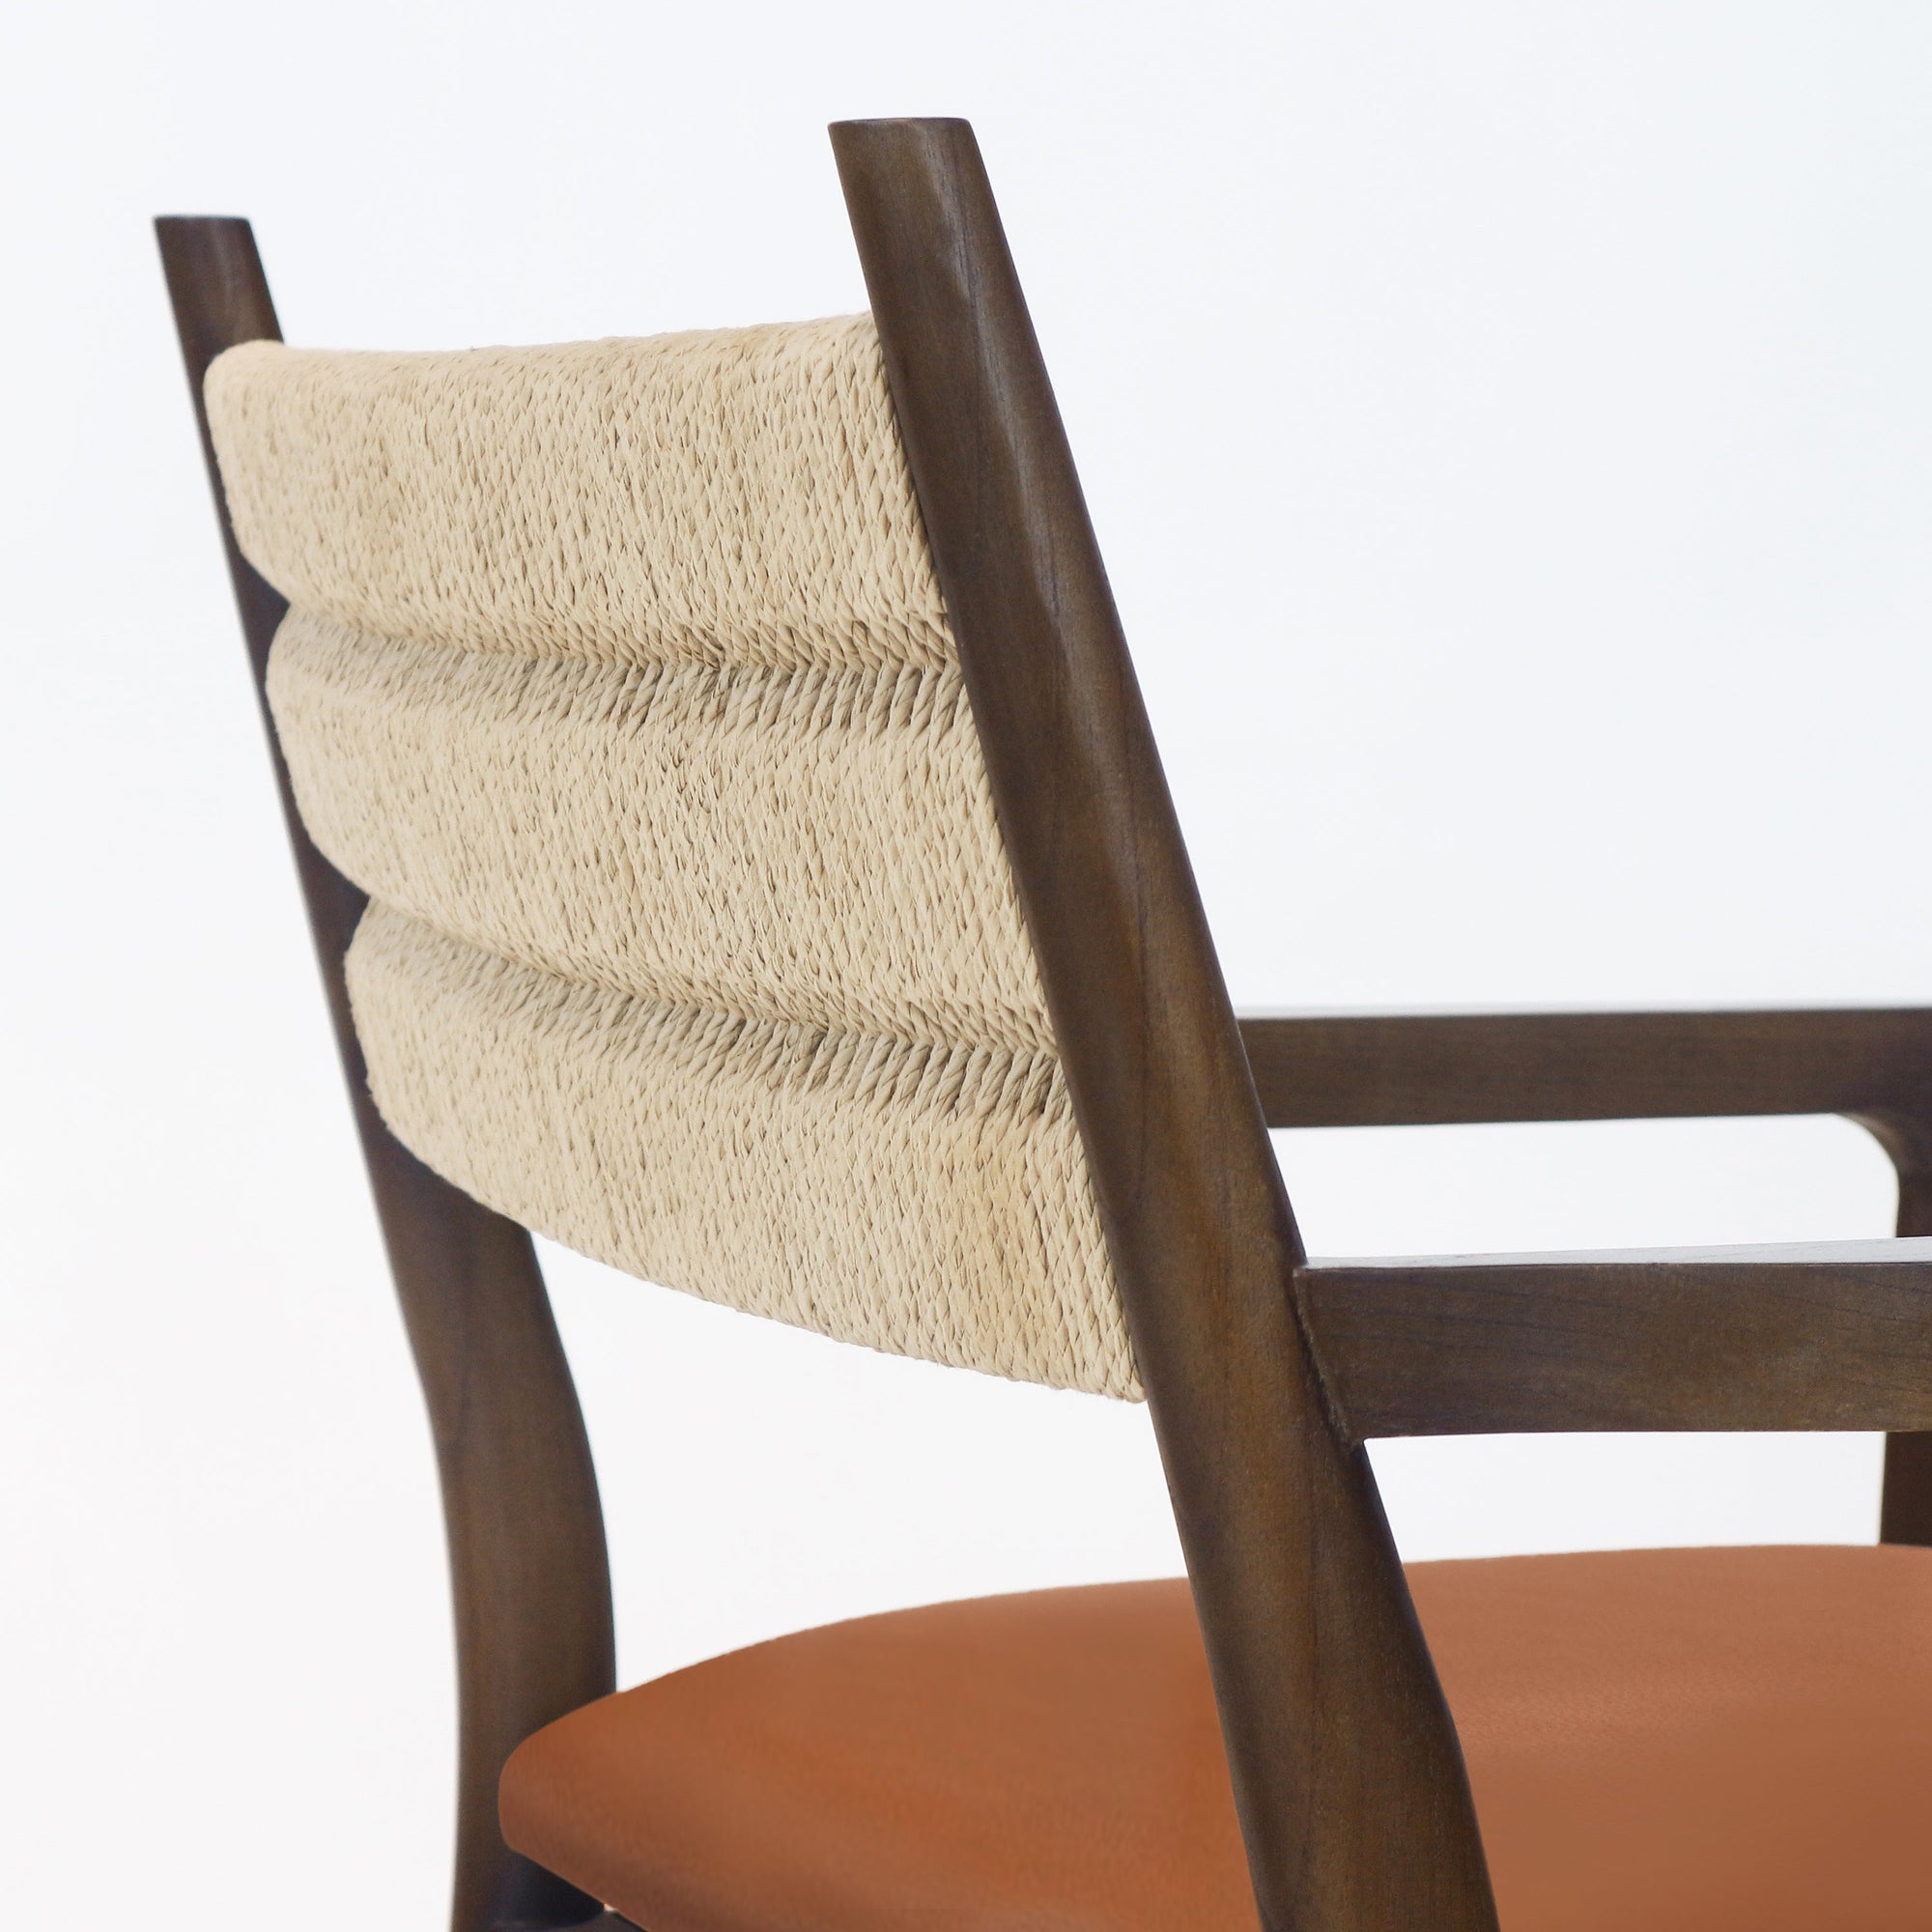 Samsara Dining Chair with Rope Backrest with Tan Leather Seat - INTERIORTONIC